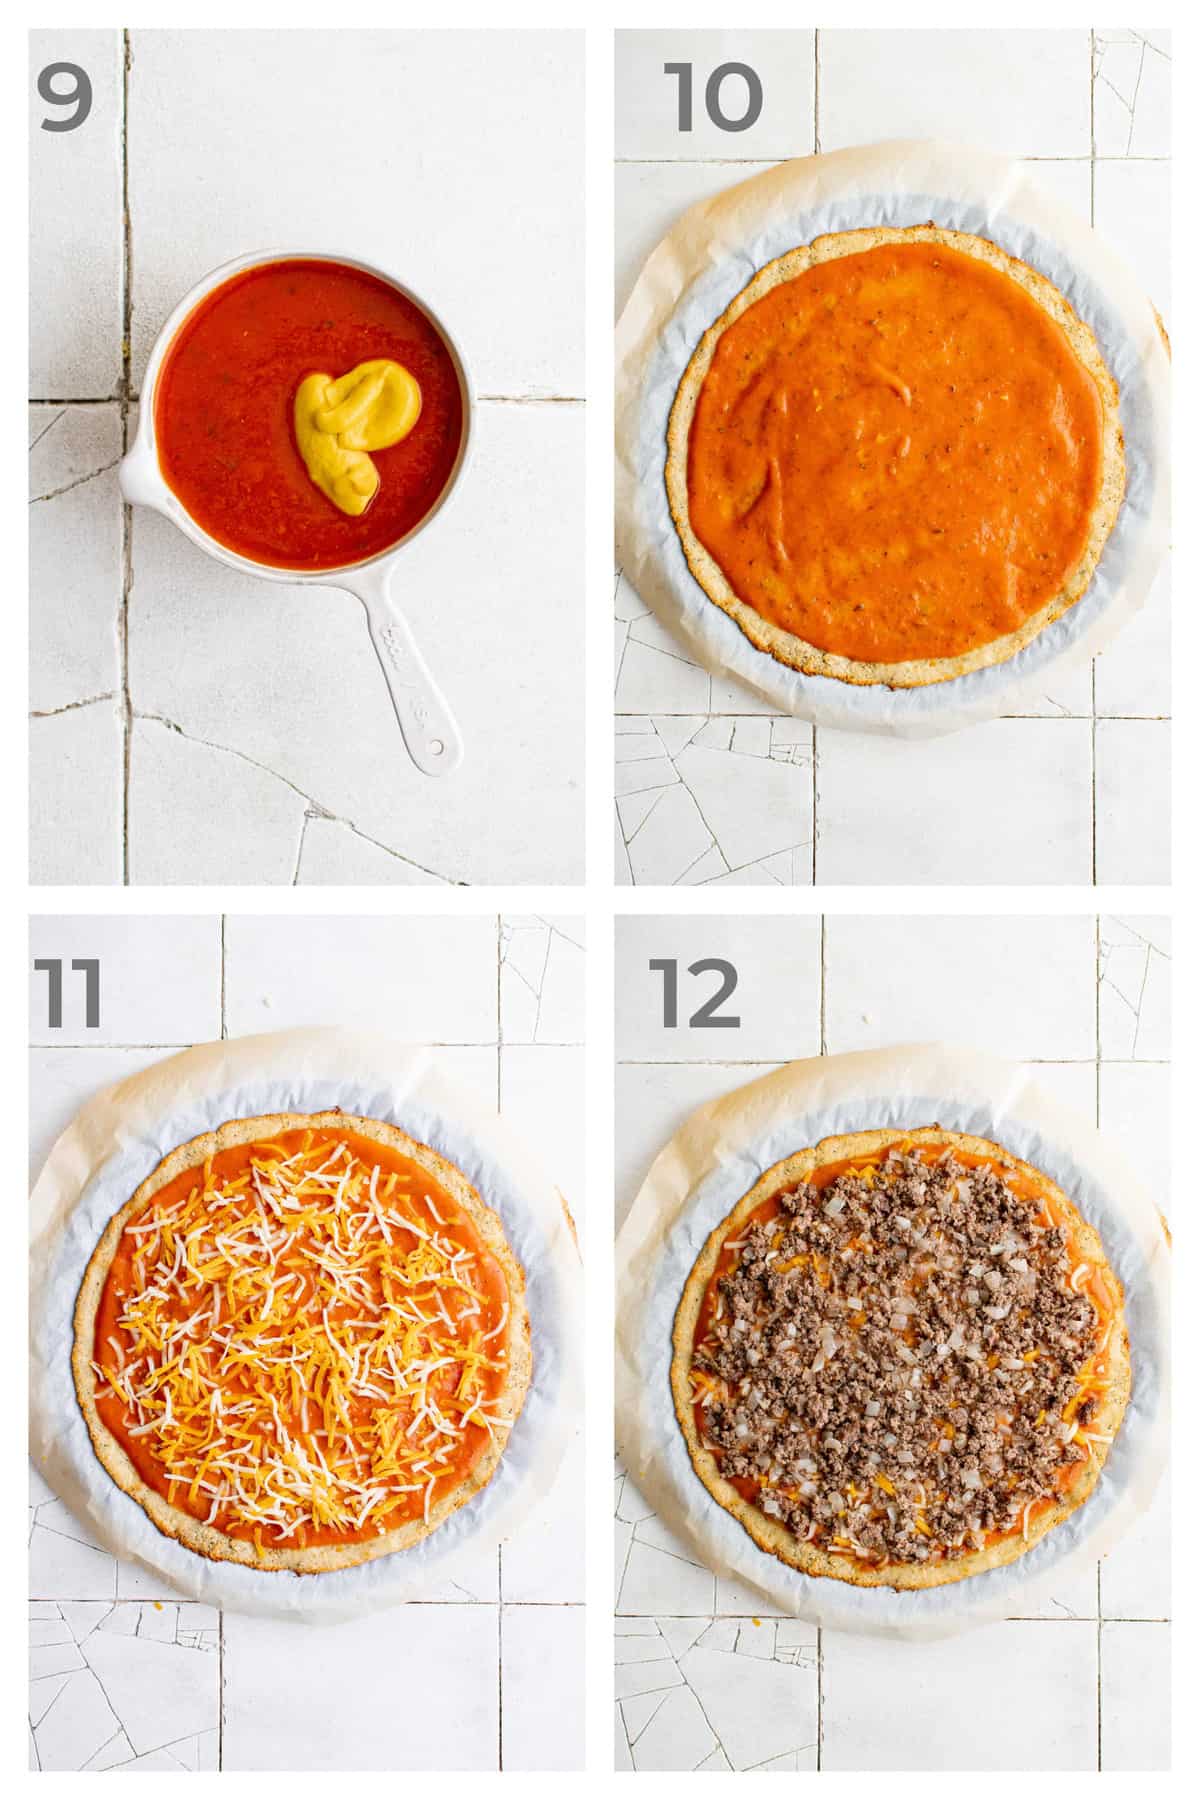 Step by step directions for piling toppings on a homemade pizza